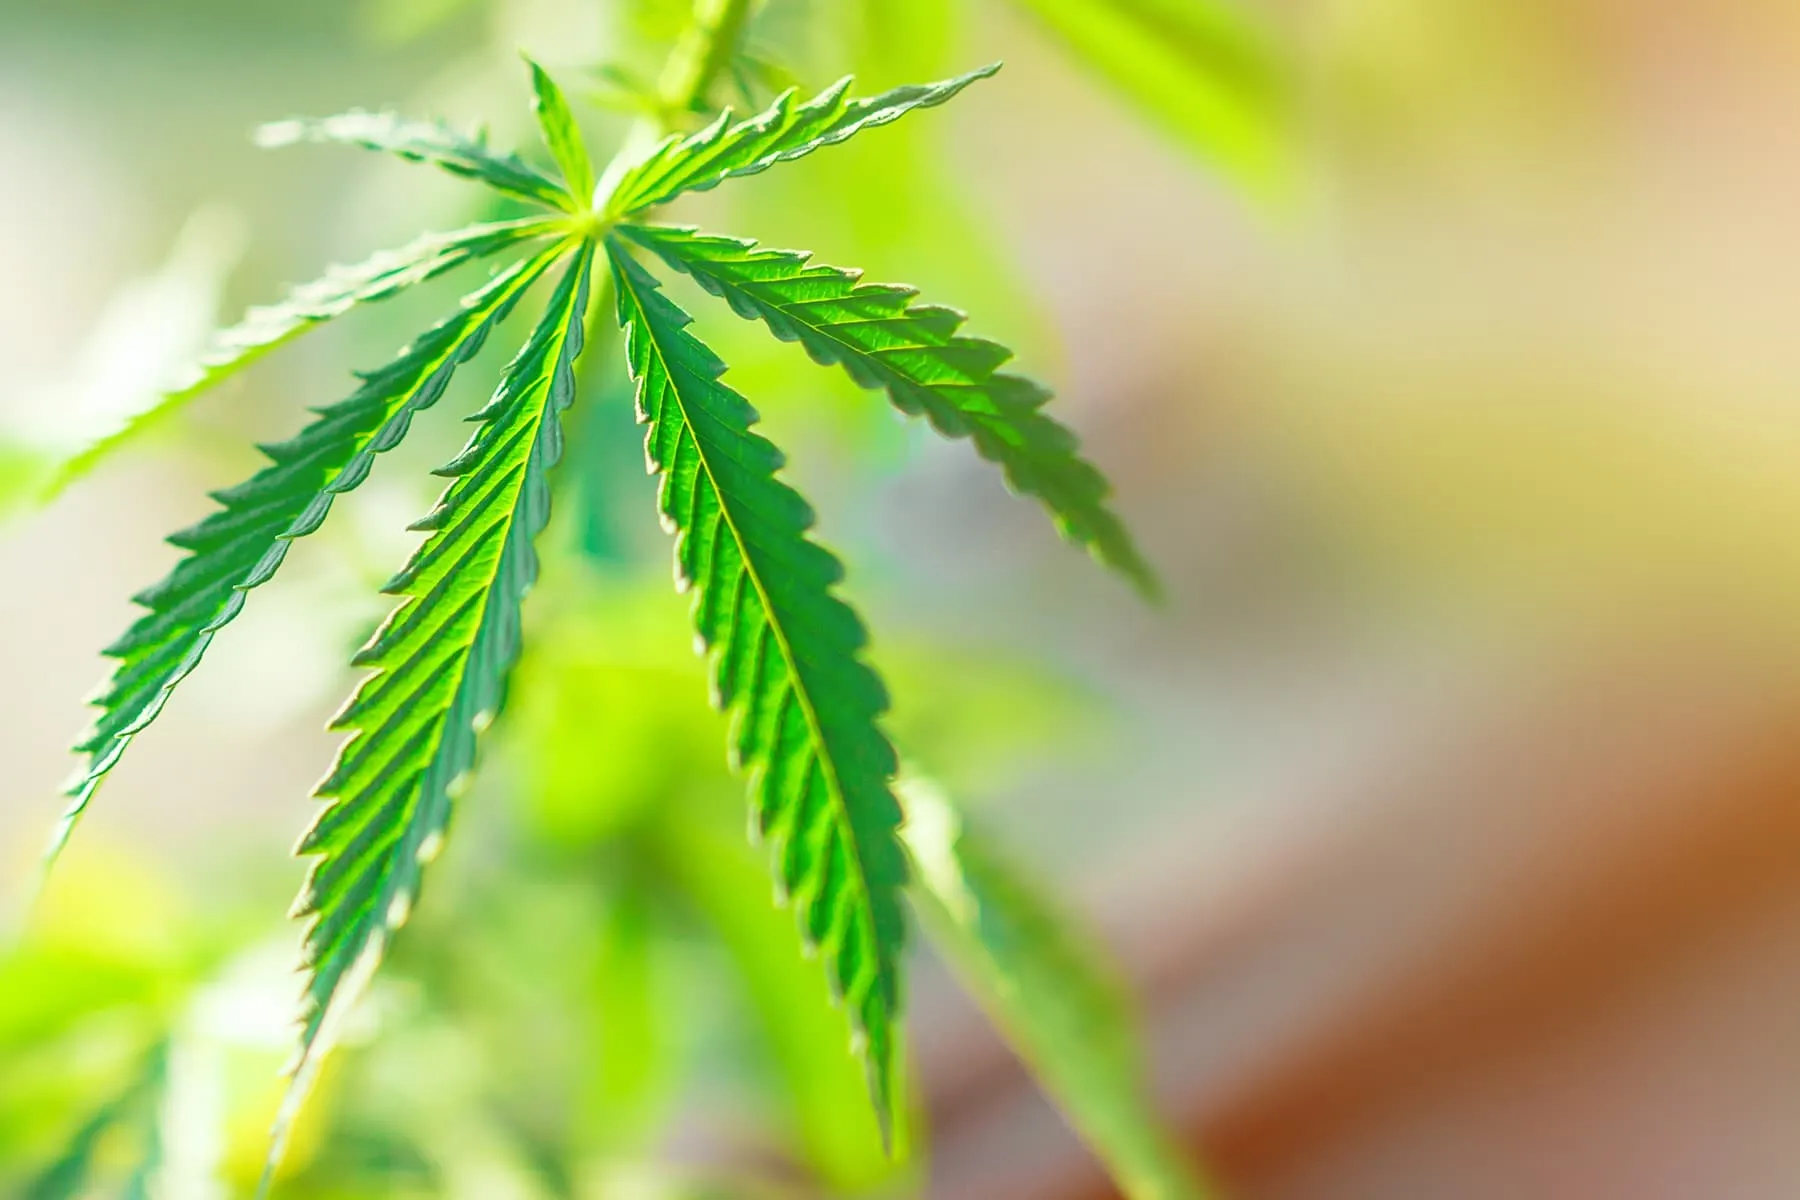 Marijuana Can Have an effect on Fetal Improvement, Even If Used Early in Being pregnant